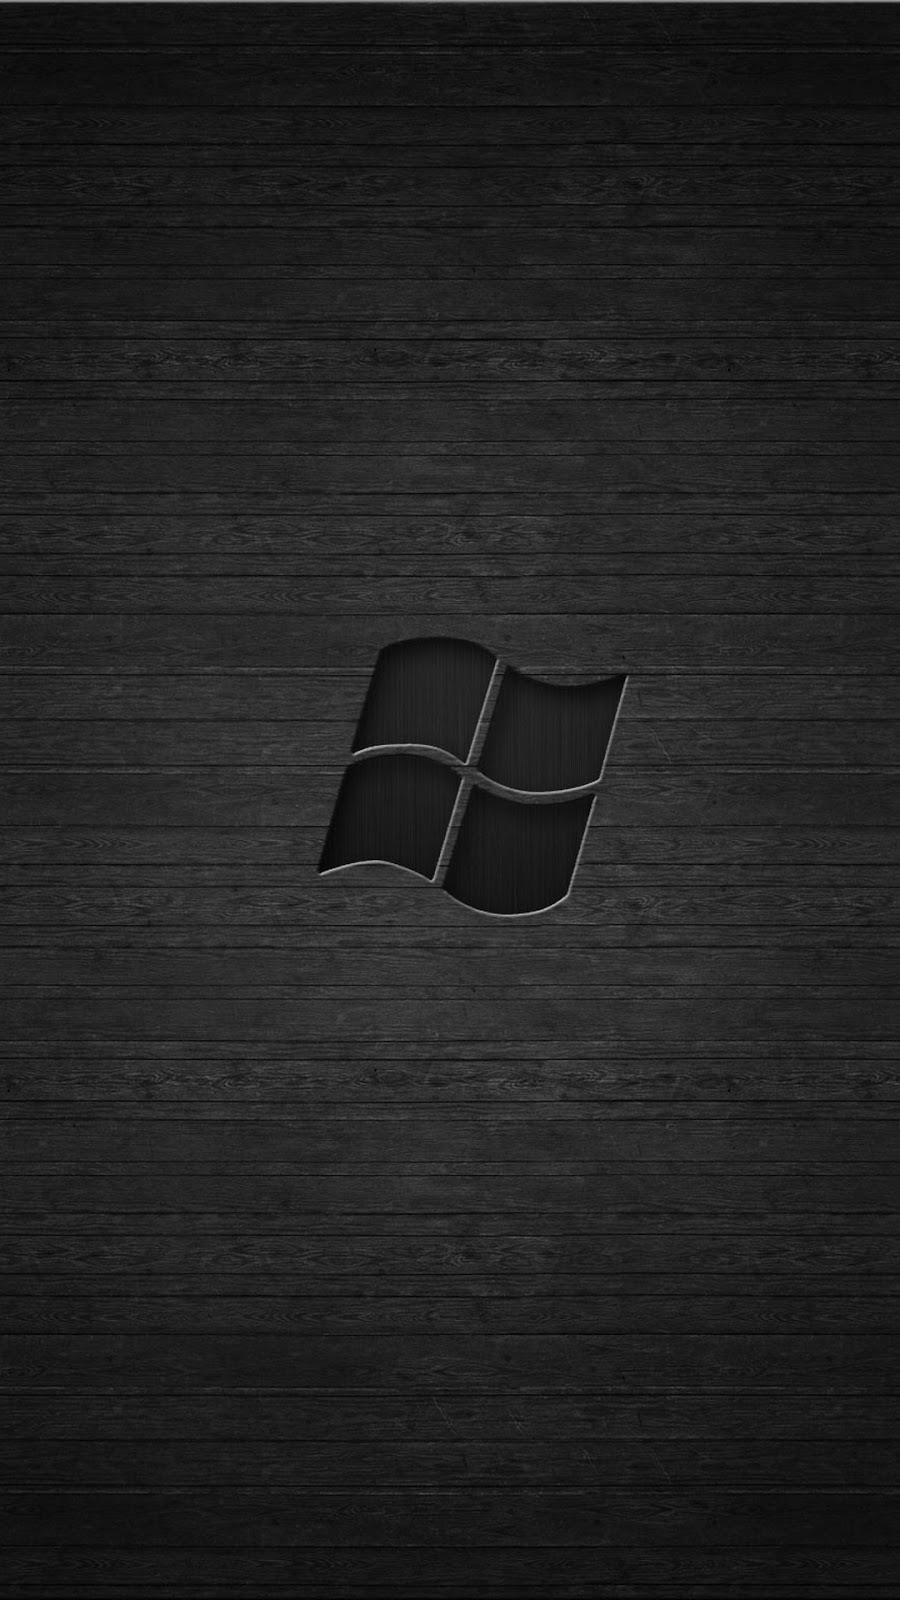 Plain Black Wallpaper Android How Can I Have A Plain Black Wallpaper